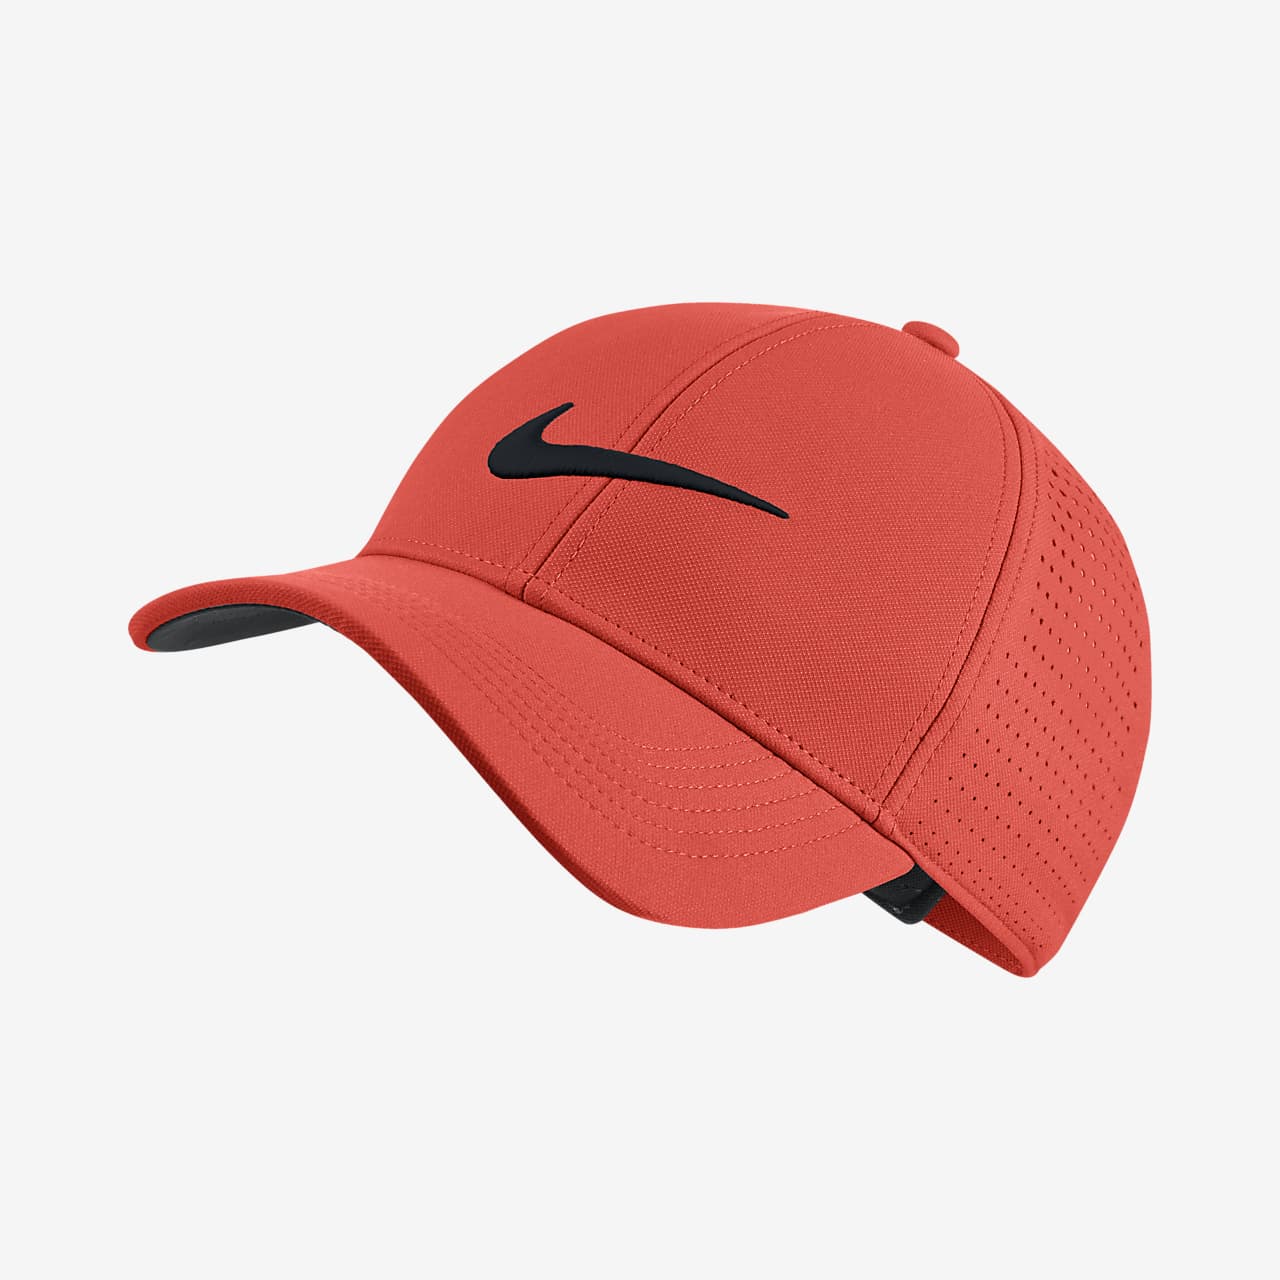 aerobill legacy91 perforated golf hat 